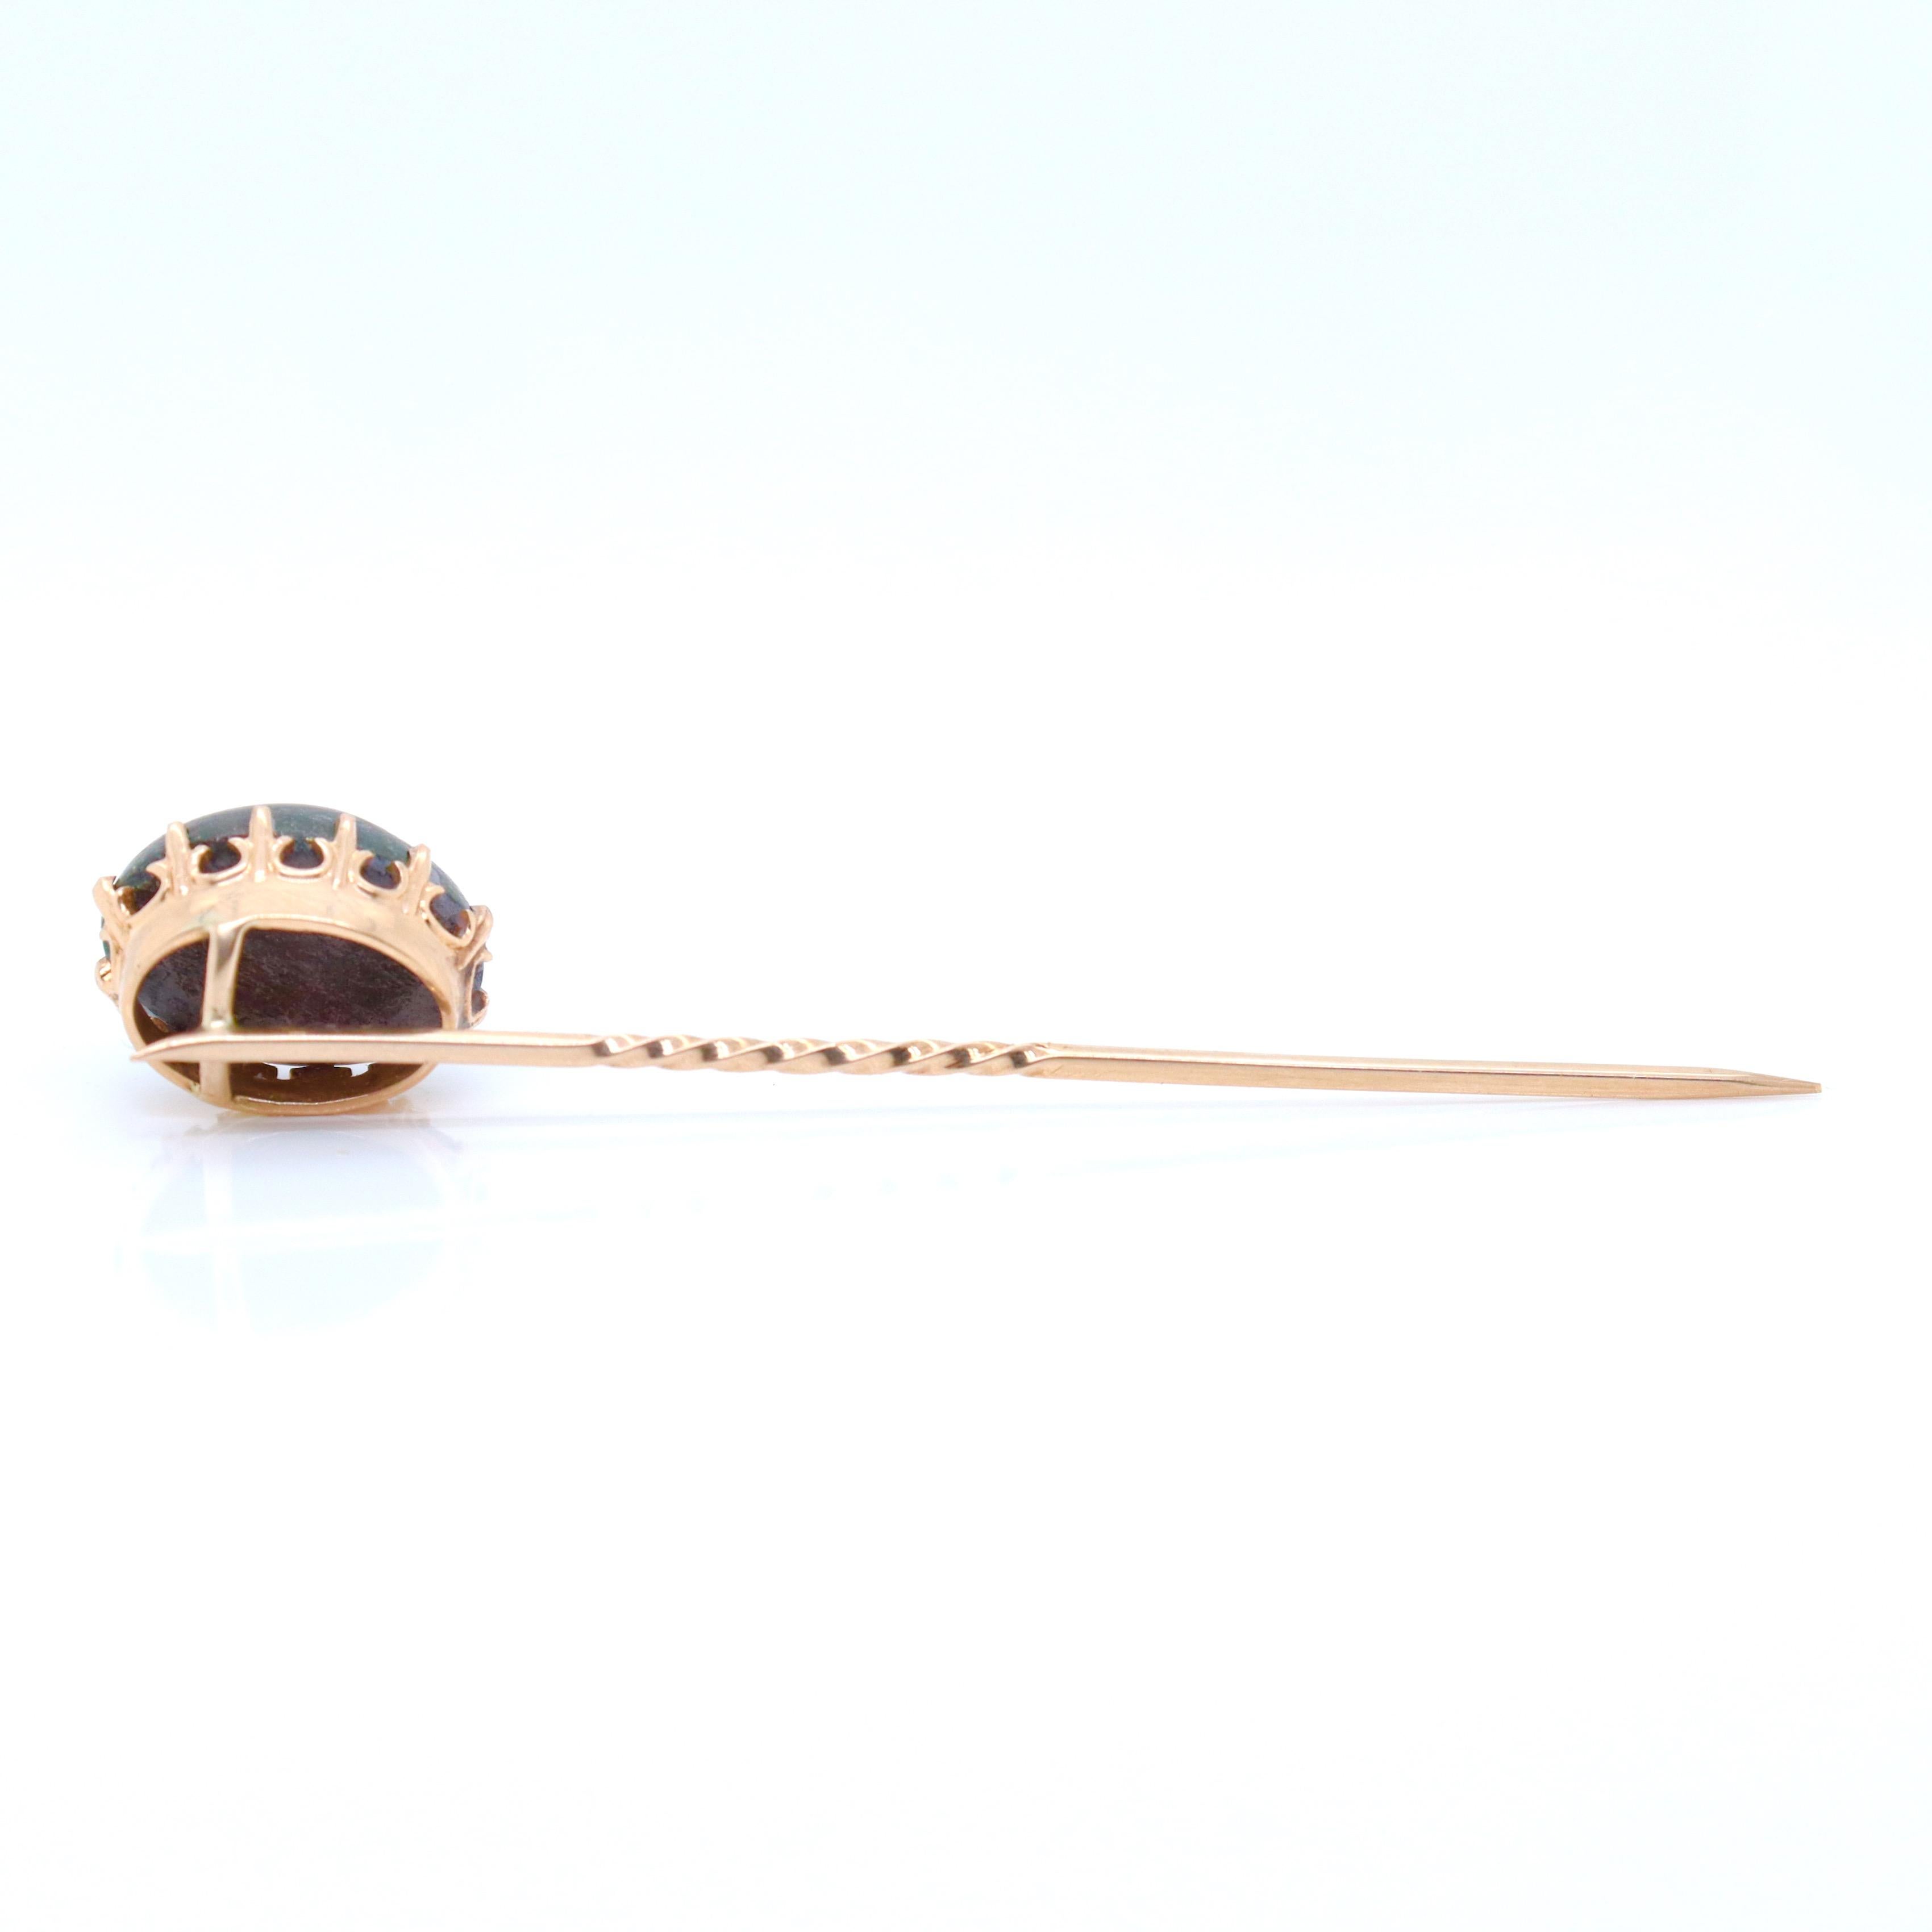 Antique Edwardian 14k Gold and Bloodstone Cabochon Stick Pin For Sale 3